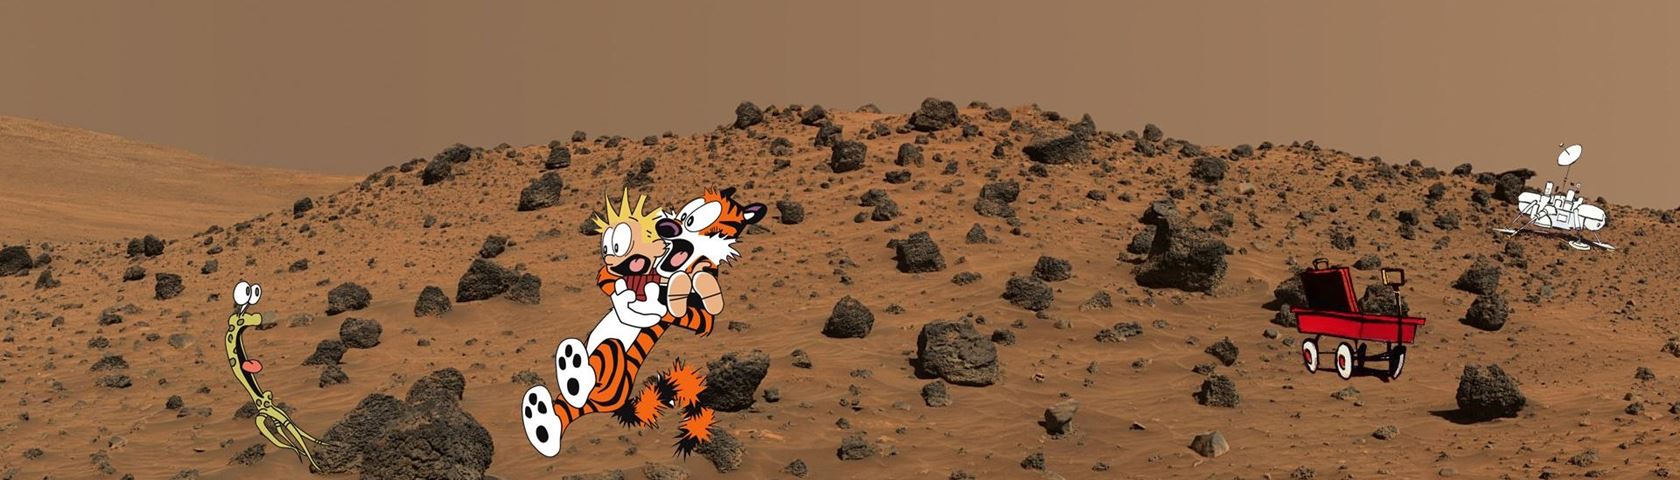 Calvin and Hobbes on Mars